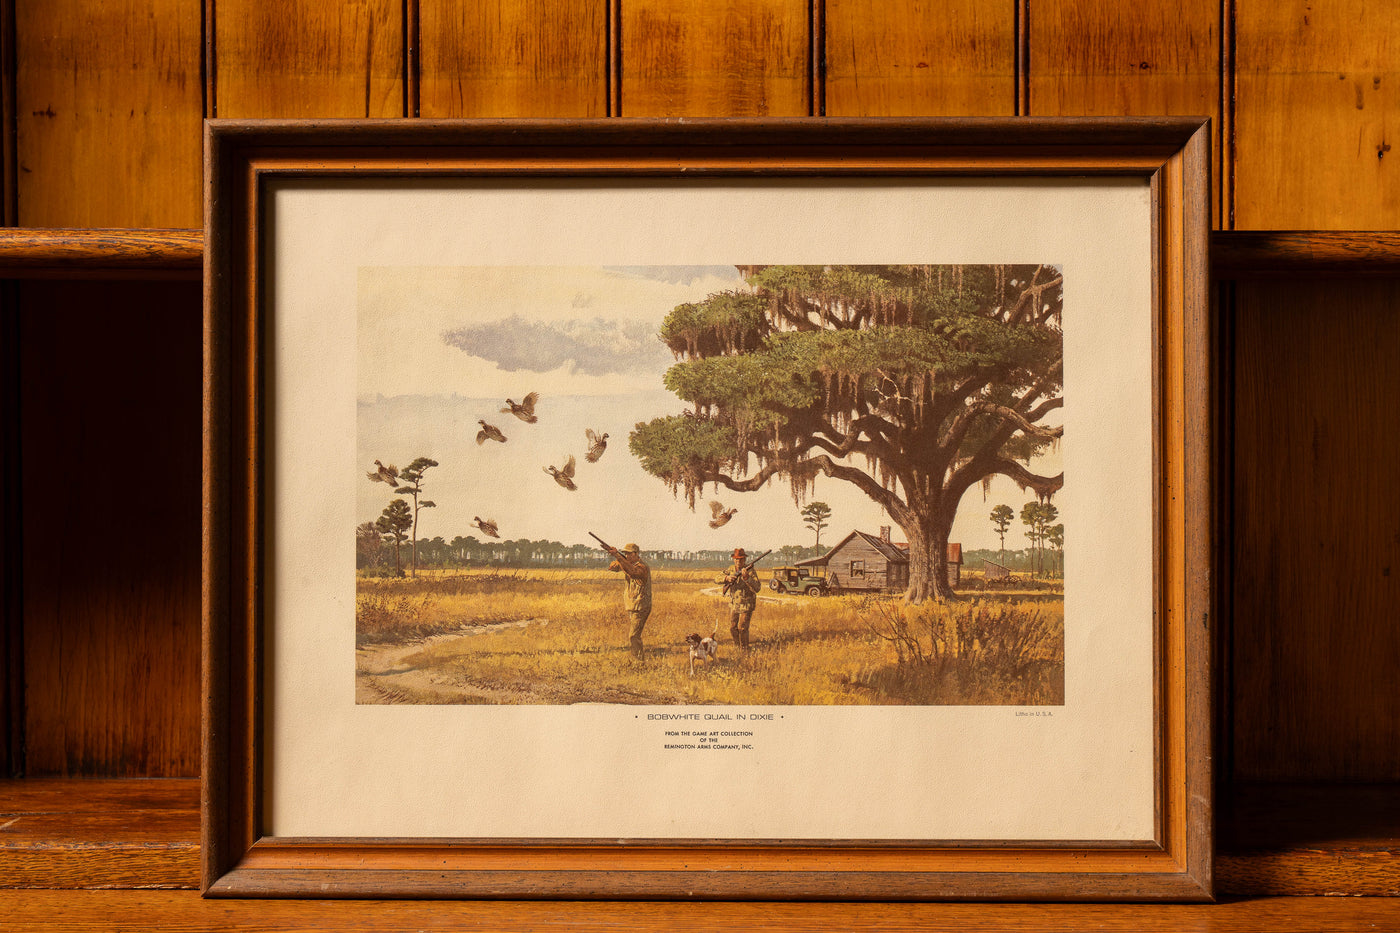 Remington Arms "Bobwhite Quail in Dixie" Game Art Collection Framed Litho